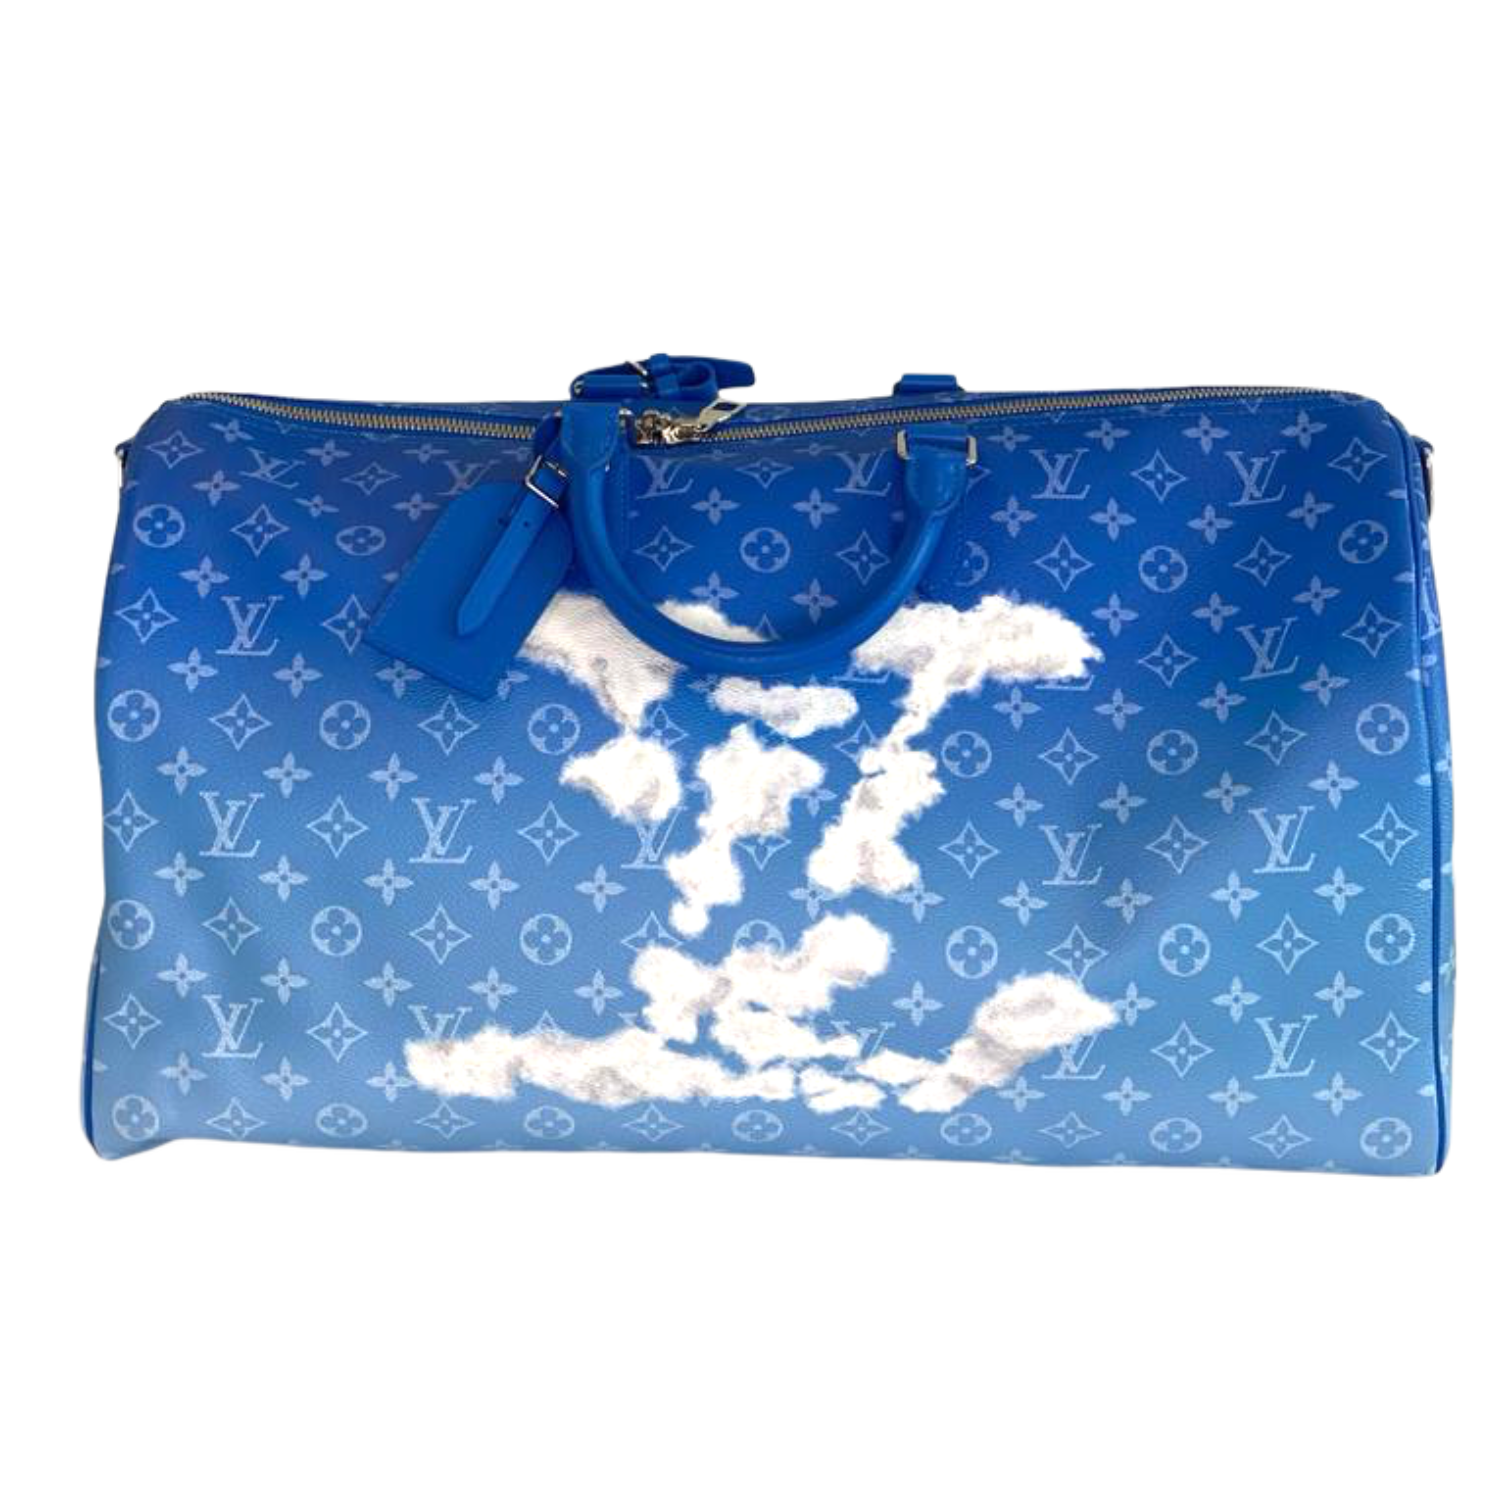 Louis+Vuitton+Keepall+Bandouliere+Duffle+45+Teal+Leather for sale online